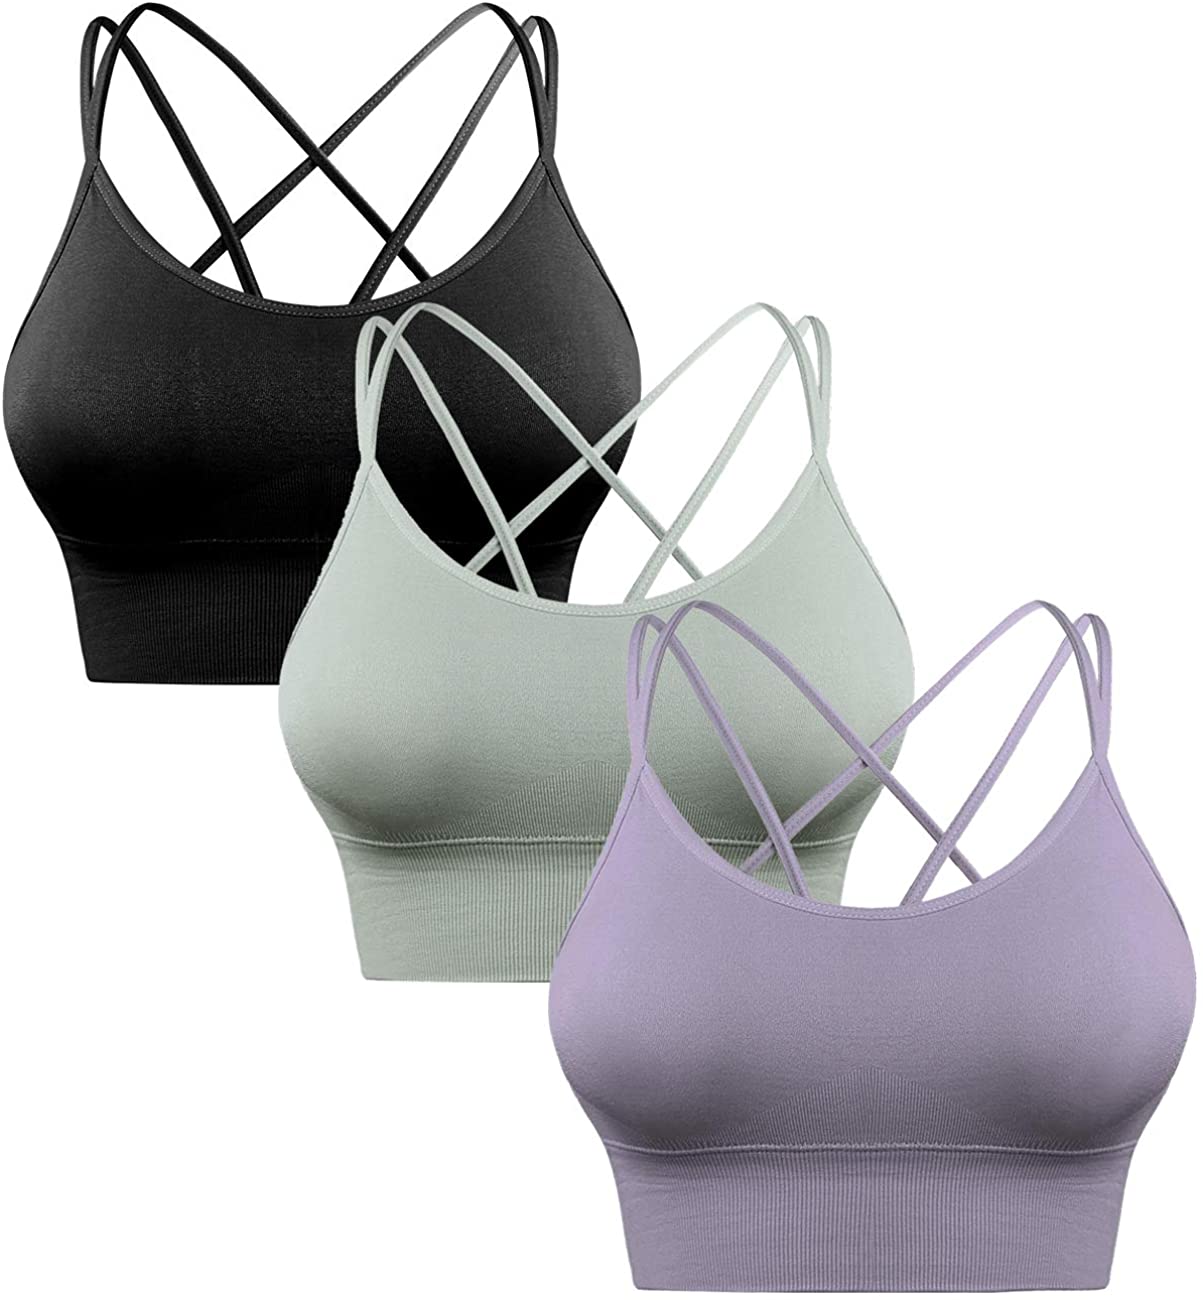 Sykooria 3 Pack Strappy Sports Bra for Women Sexy Crisscross for